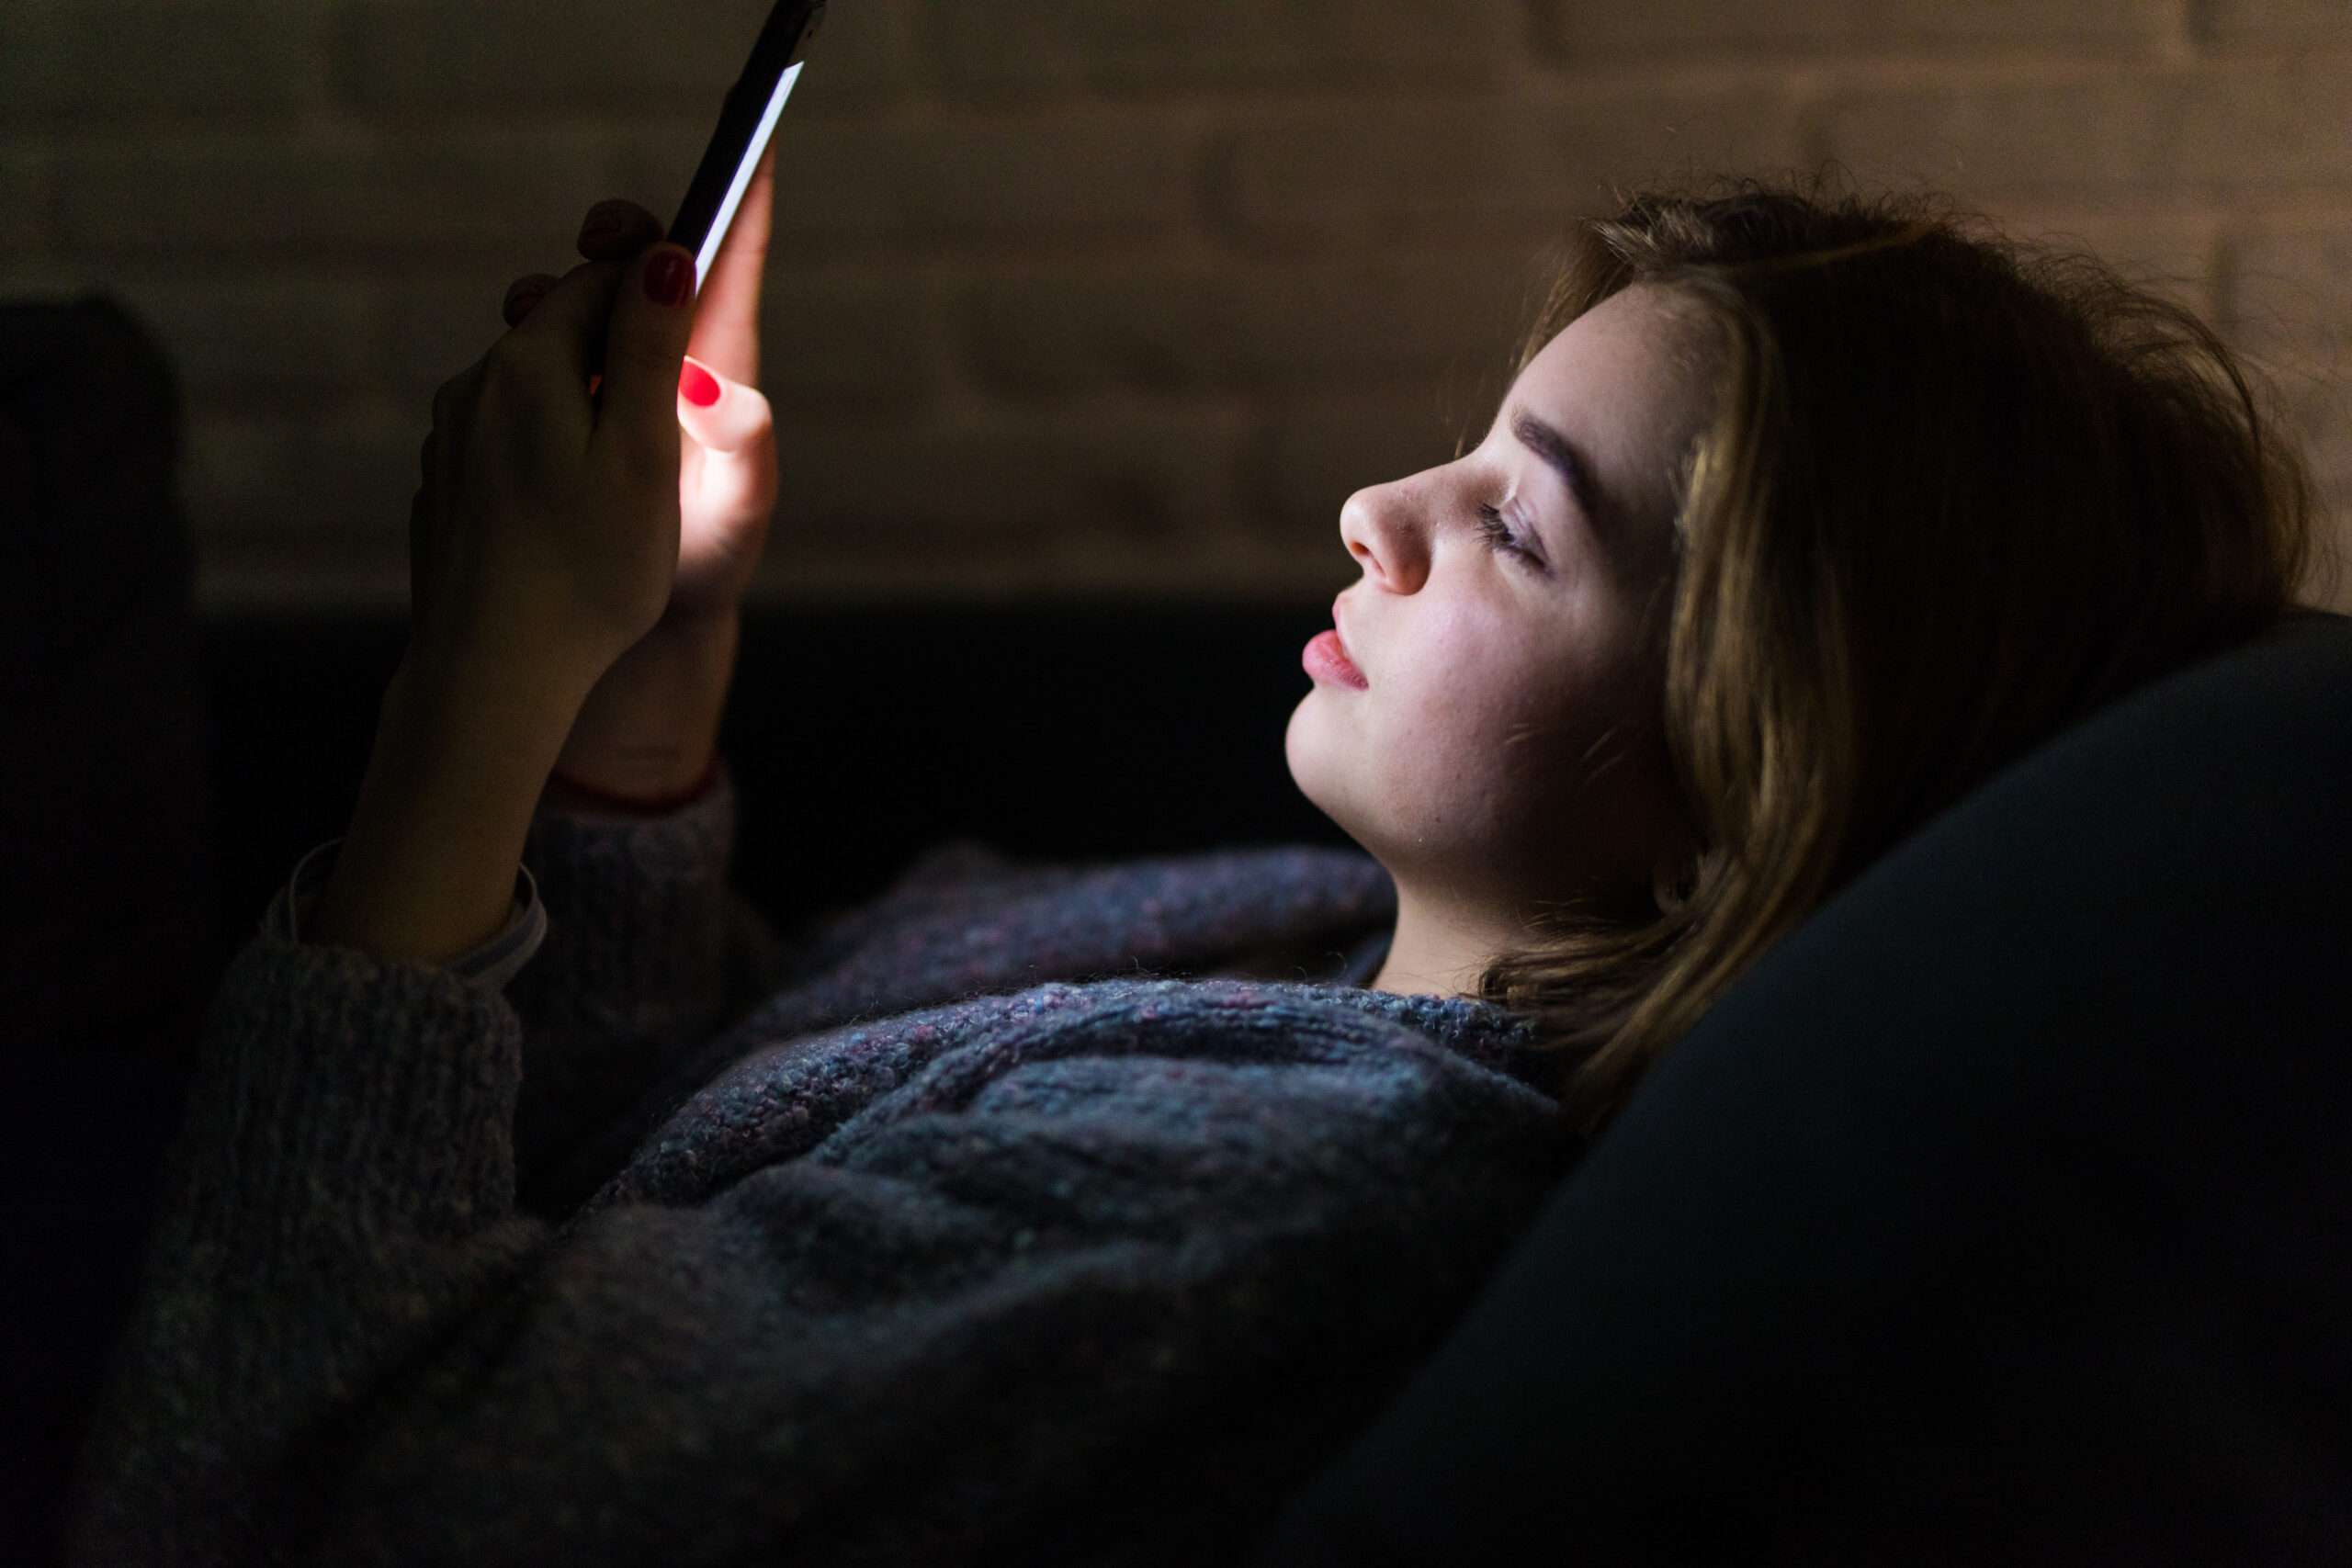 Surgeon general issues public-health advisory that warns about the dangers of social-media use to children's mental health